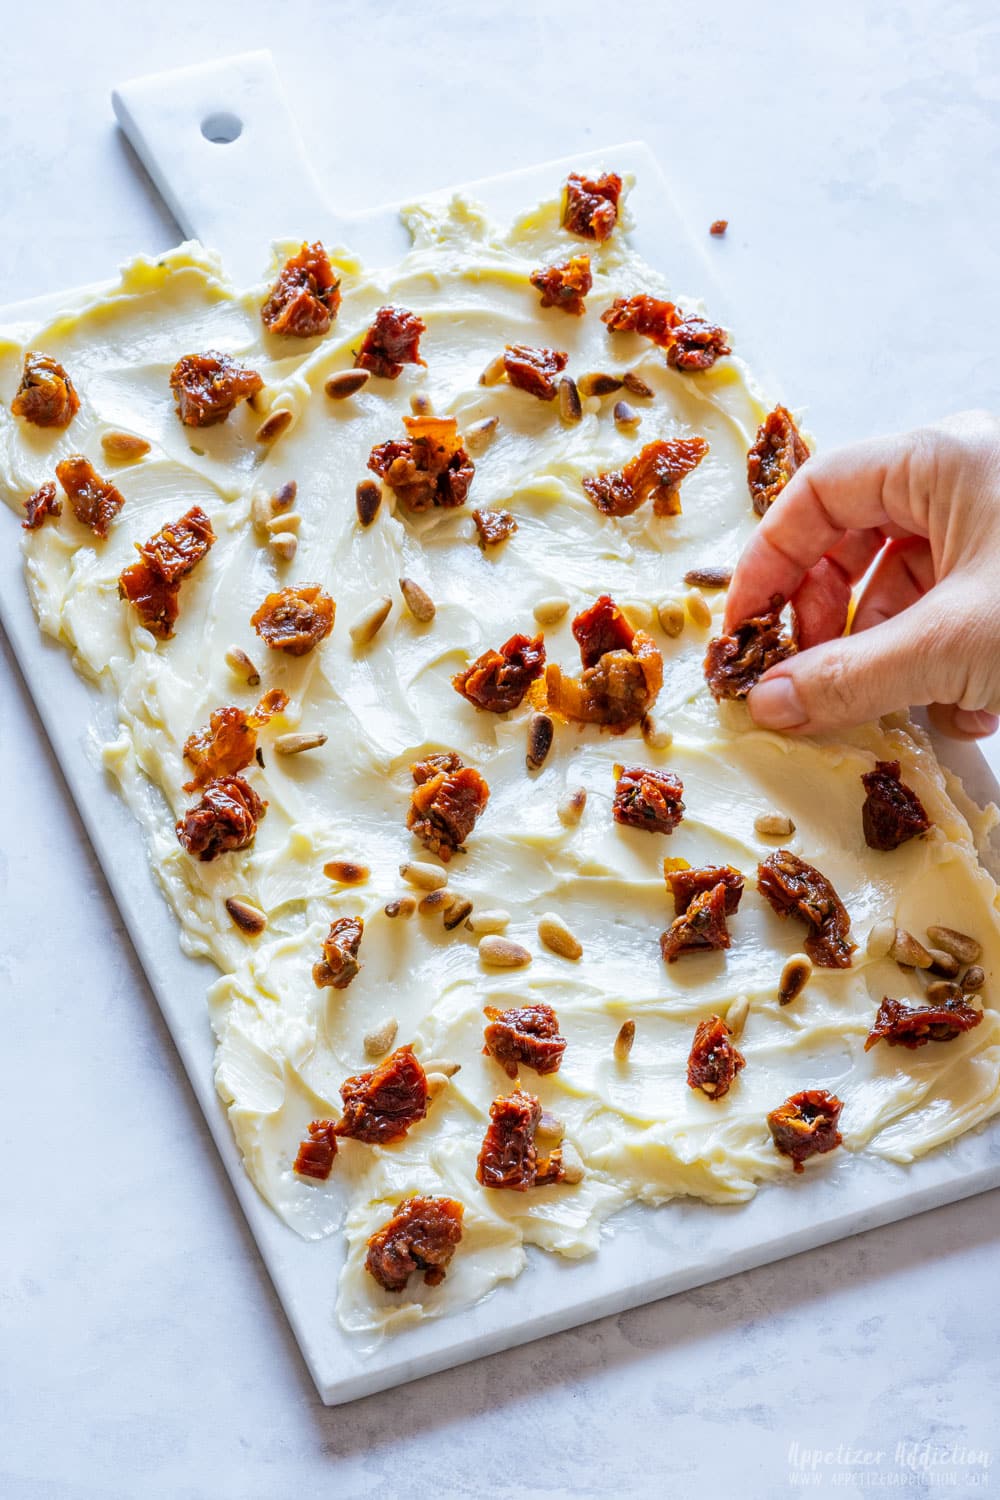 Topping butter board with sundried tomatoes.